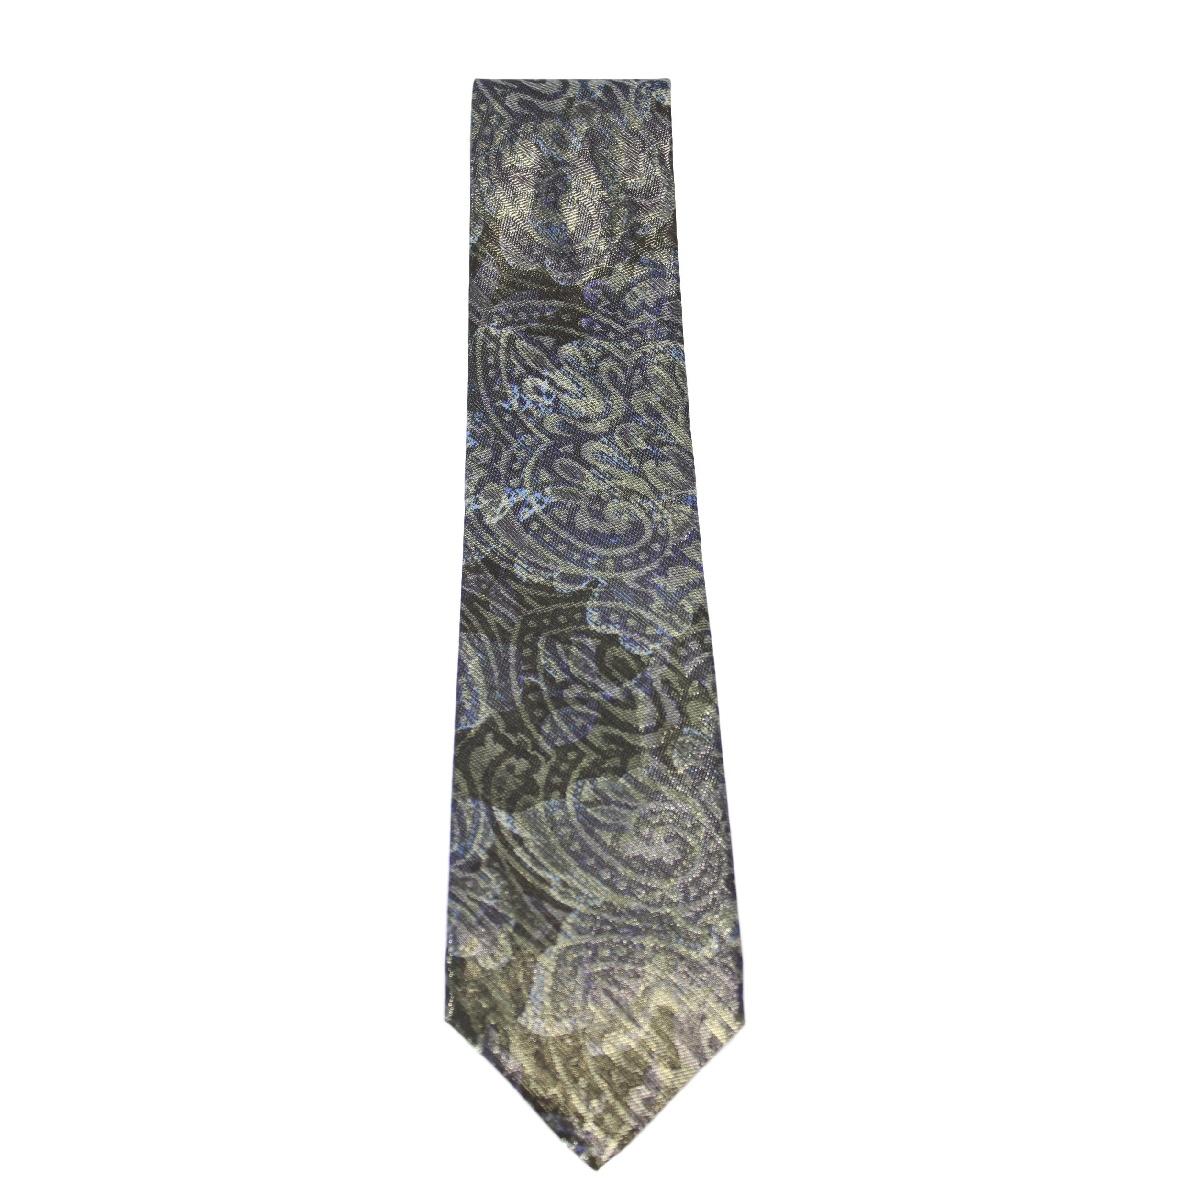 Brioni vintage evening tie. The tie has colors ranging from purple to gold with floral designs, 100% silk. Made in Italy. New with label.

Length: about 150 cm
Width: about 9 cm